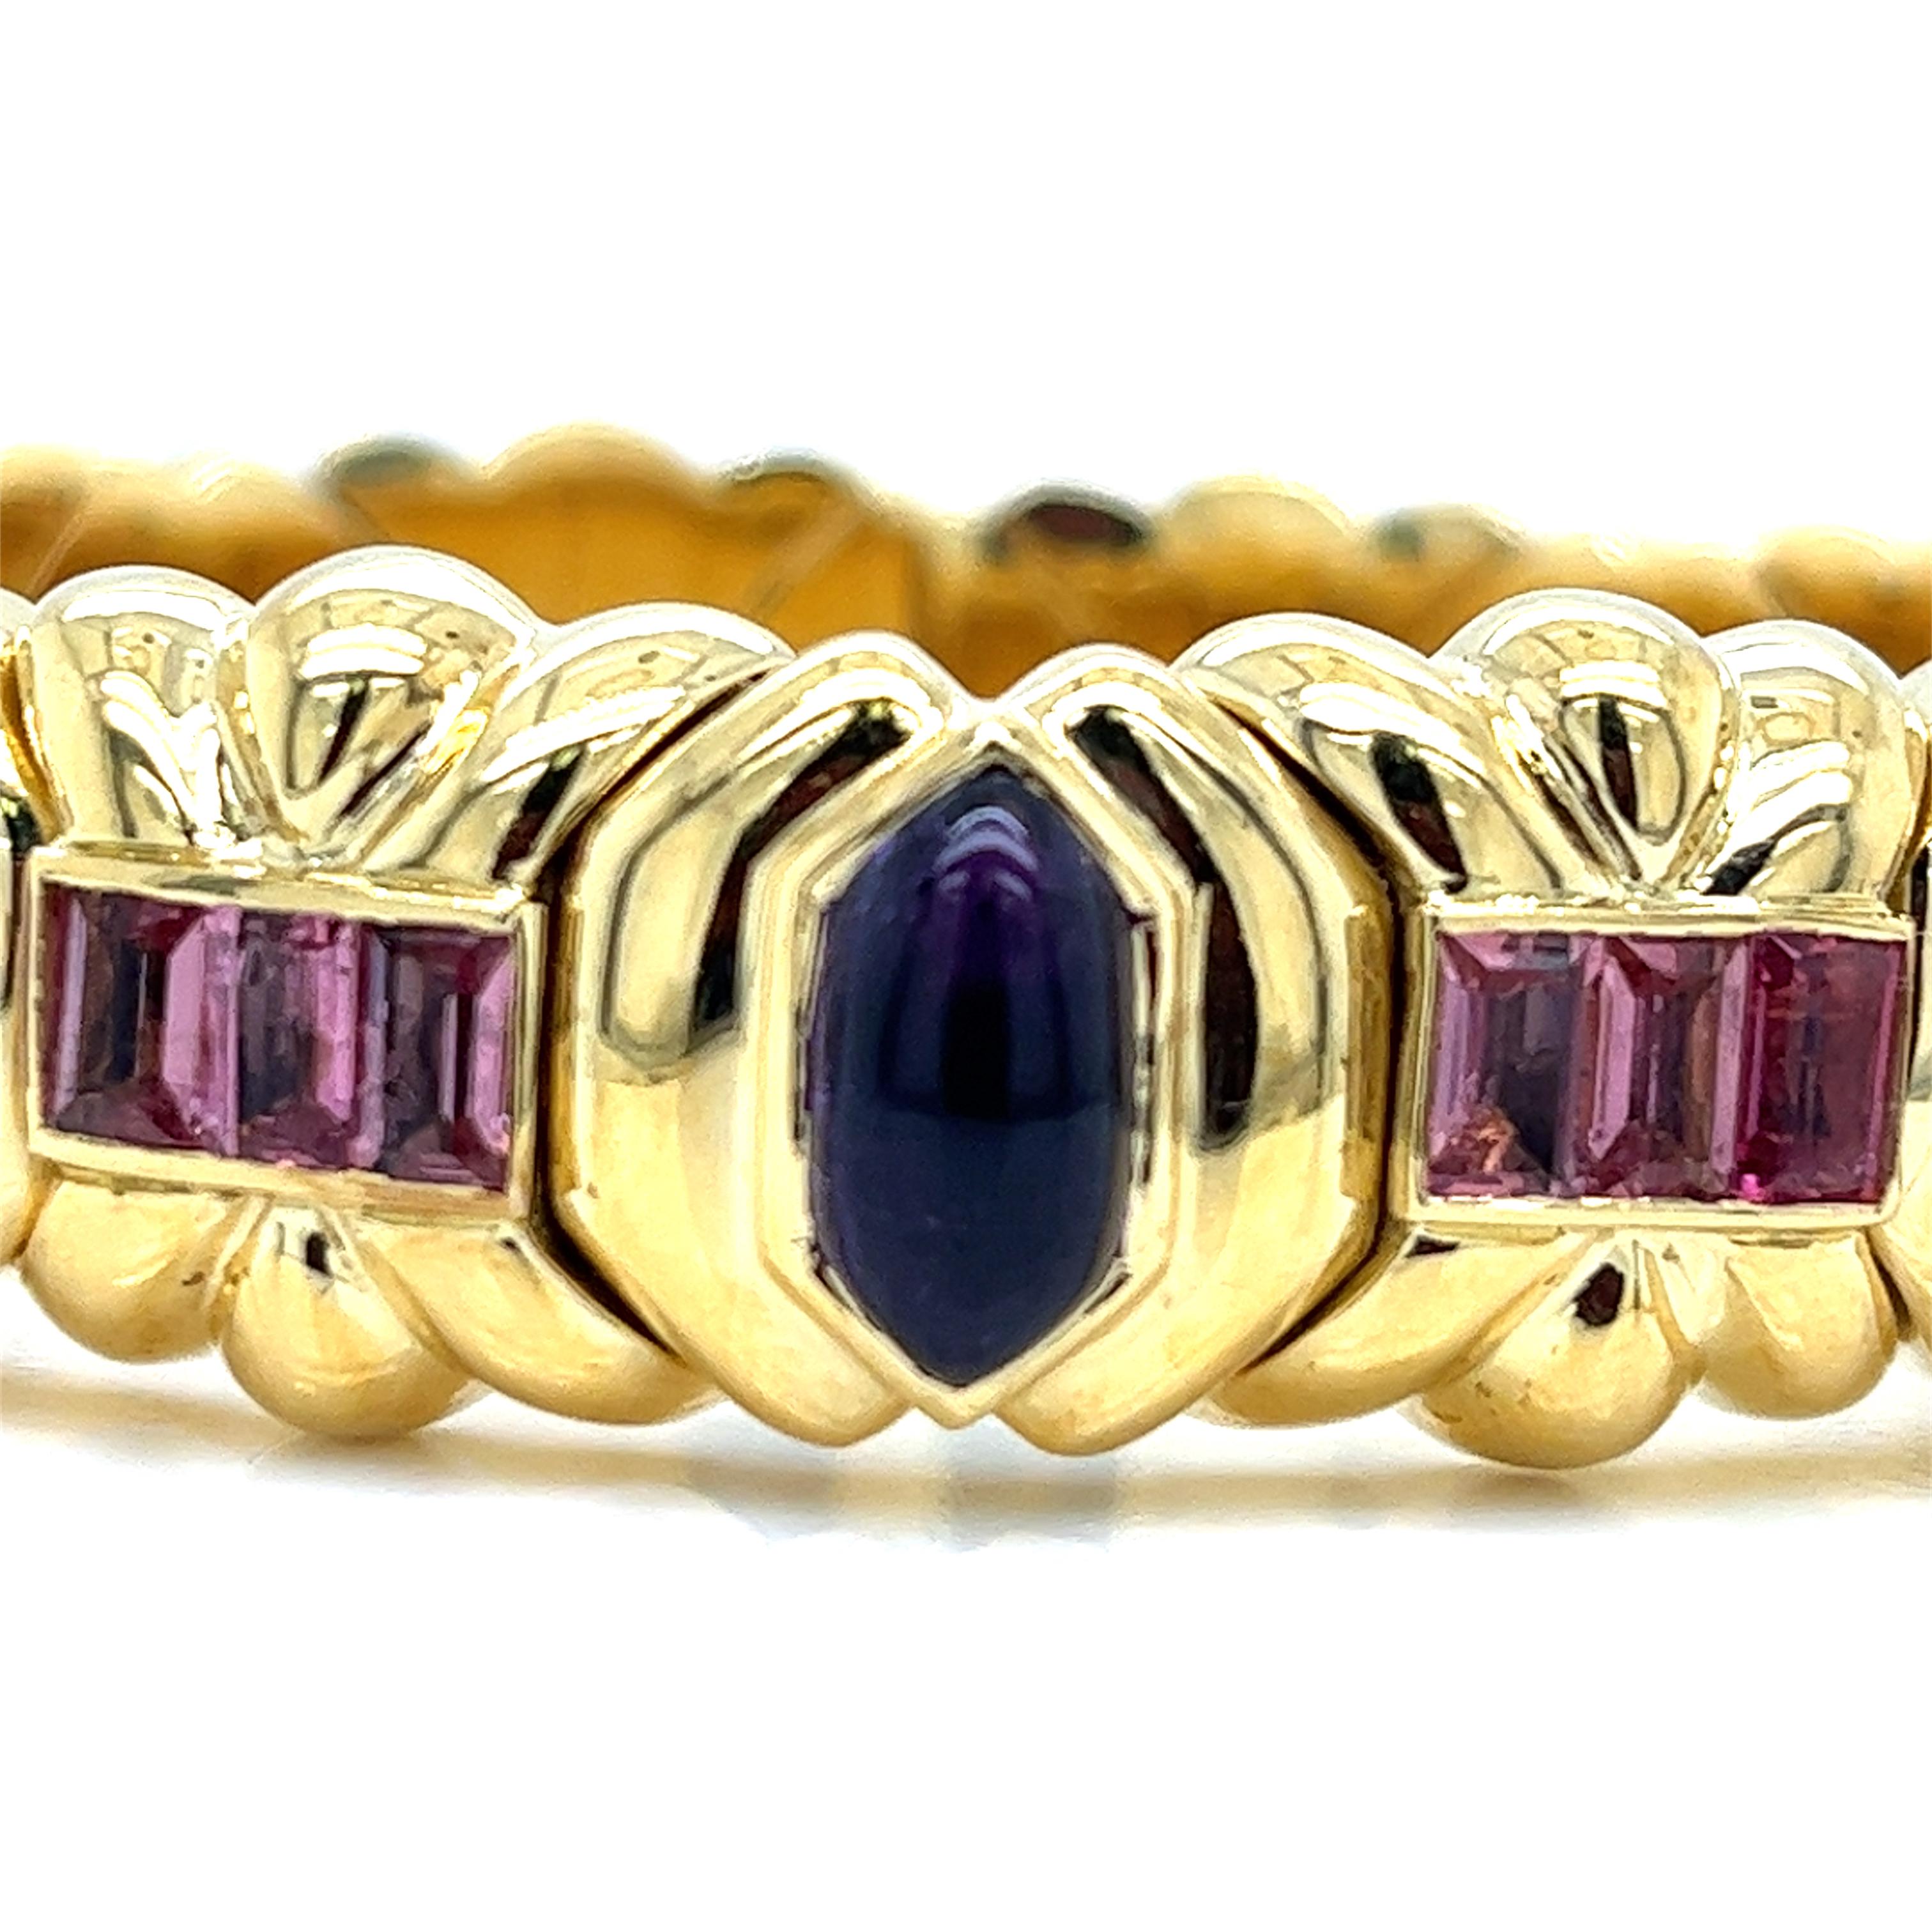 Contemporary 18Kt Yellow Gold Bracelet with Amethyst and Tourmaline. Total Weights 72 grams For Sale